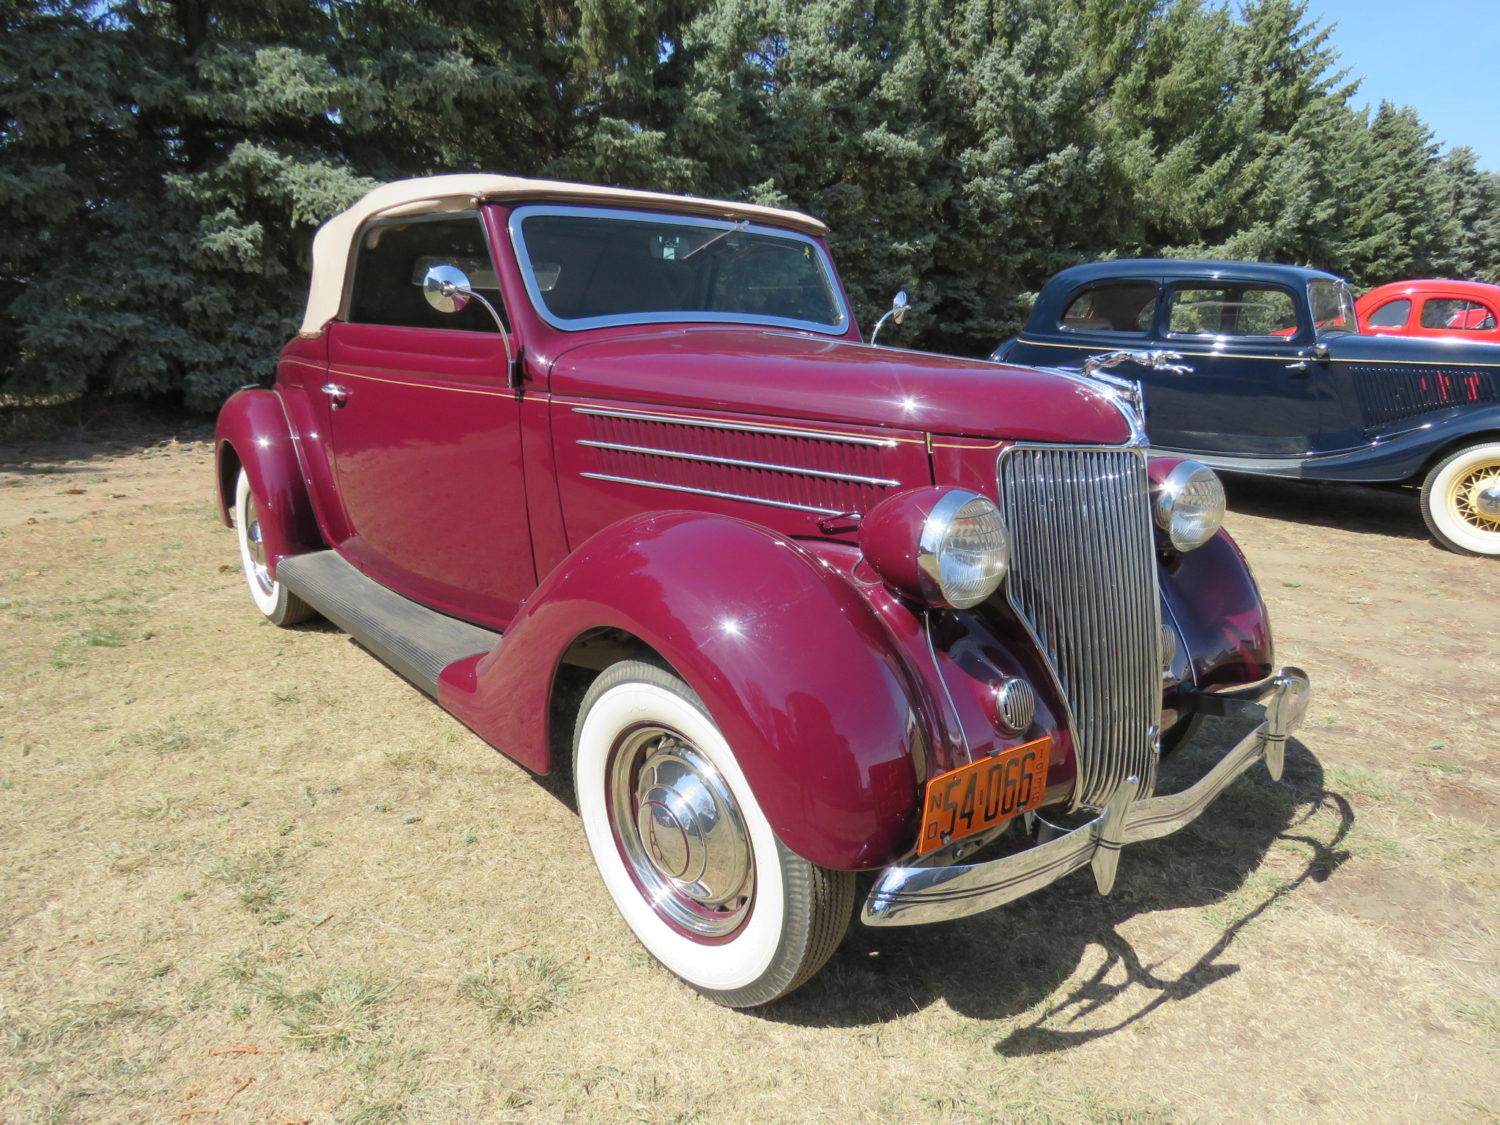 Fabulous Collector Cars, Antique Tractors, Memorabilia & More! The Krinke Collection - image 5